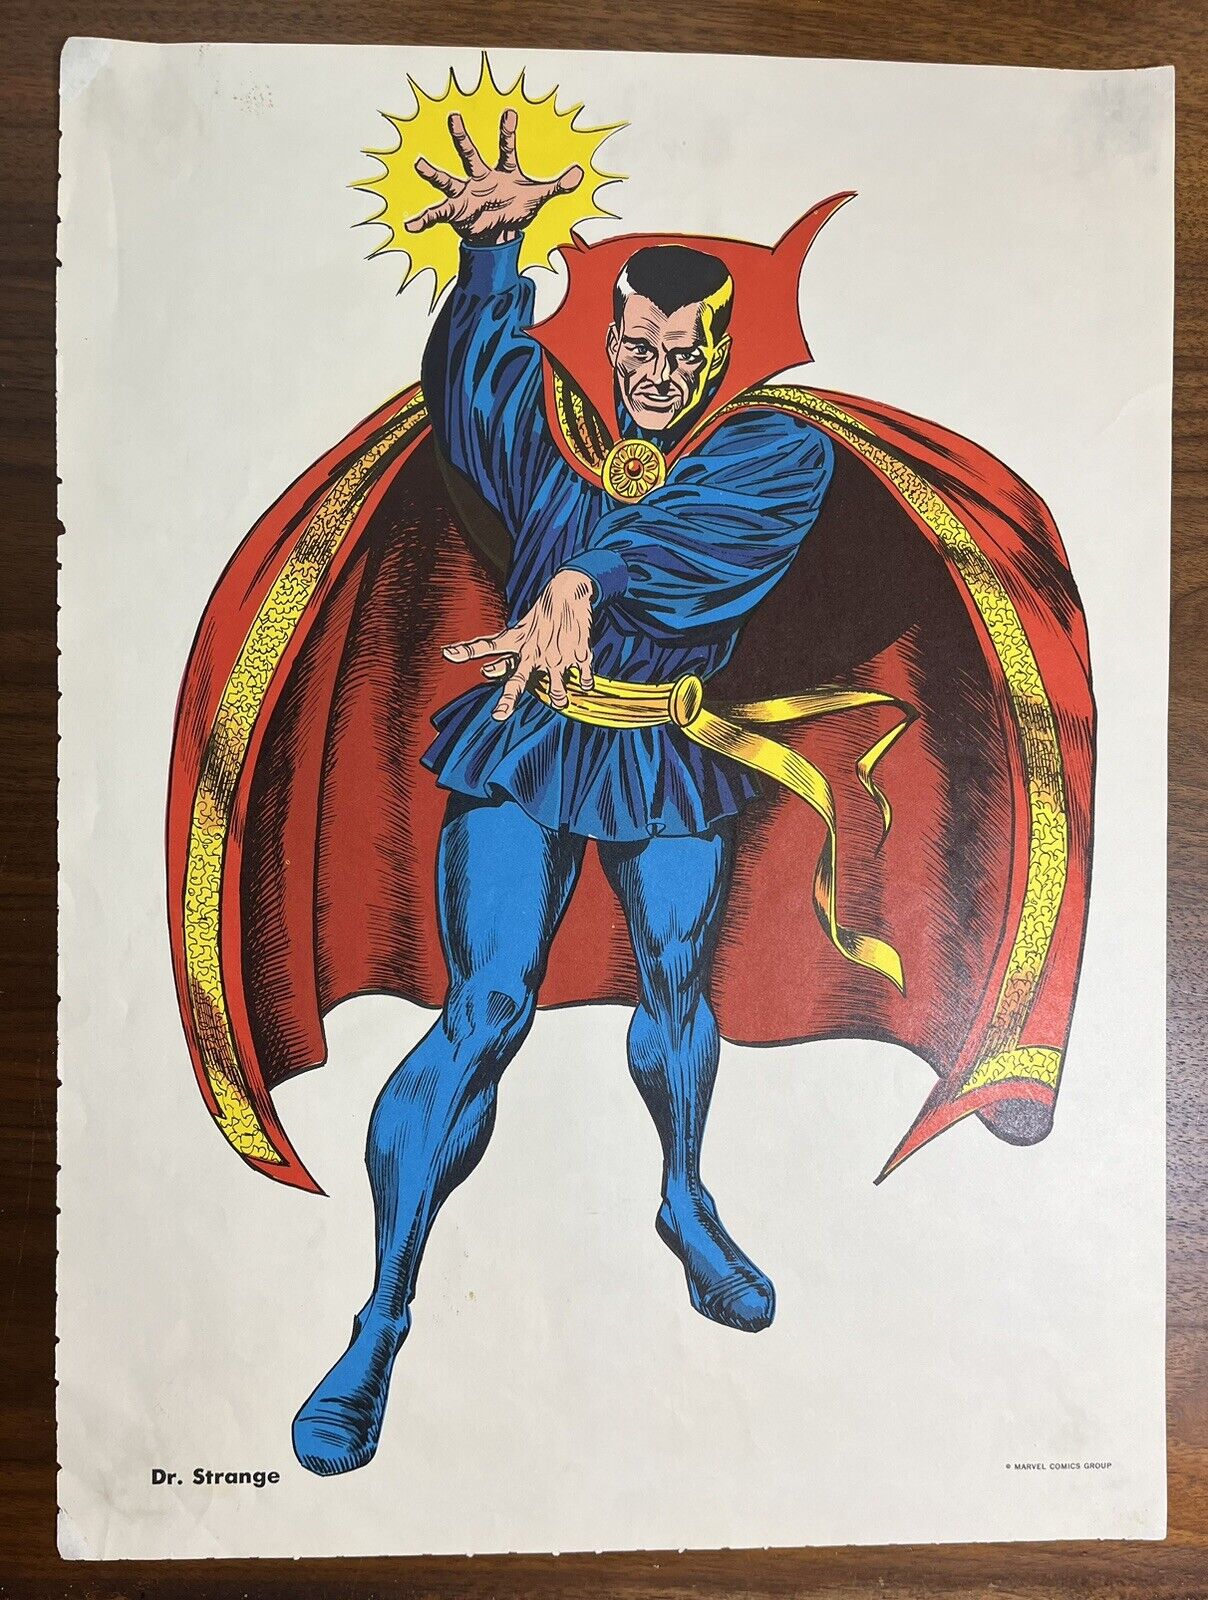 DR. STRANGE 1966 MMMS Super Heroes Club POSTER Personality Posters 12 x 16